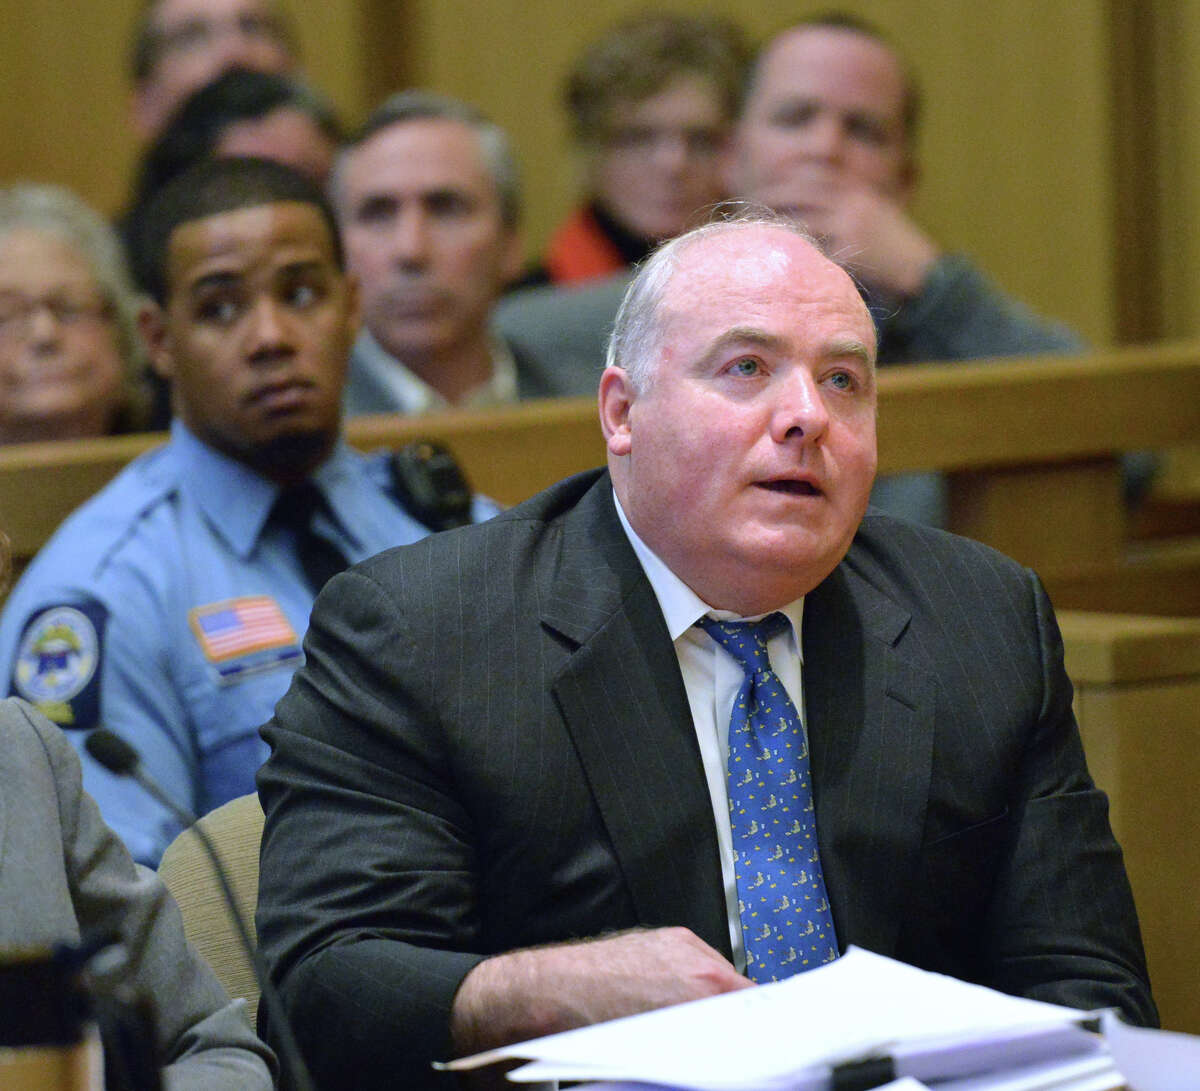 Michael Skakel reacts to being granted bail during his hearing at Stamford Superior Court, in Stamford, Conn., Thursday, Nov. 21, 2013. Skakel will be released on bail after receiving a new trial for the 1975 murder of his Greenwich, Conn., neighbor, Martha Moxley, which he was convicted of in 2002.